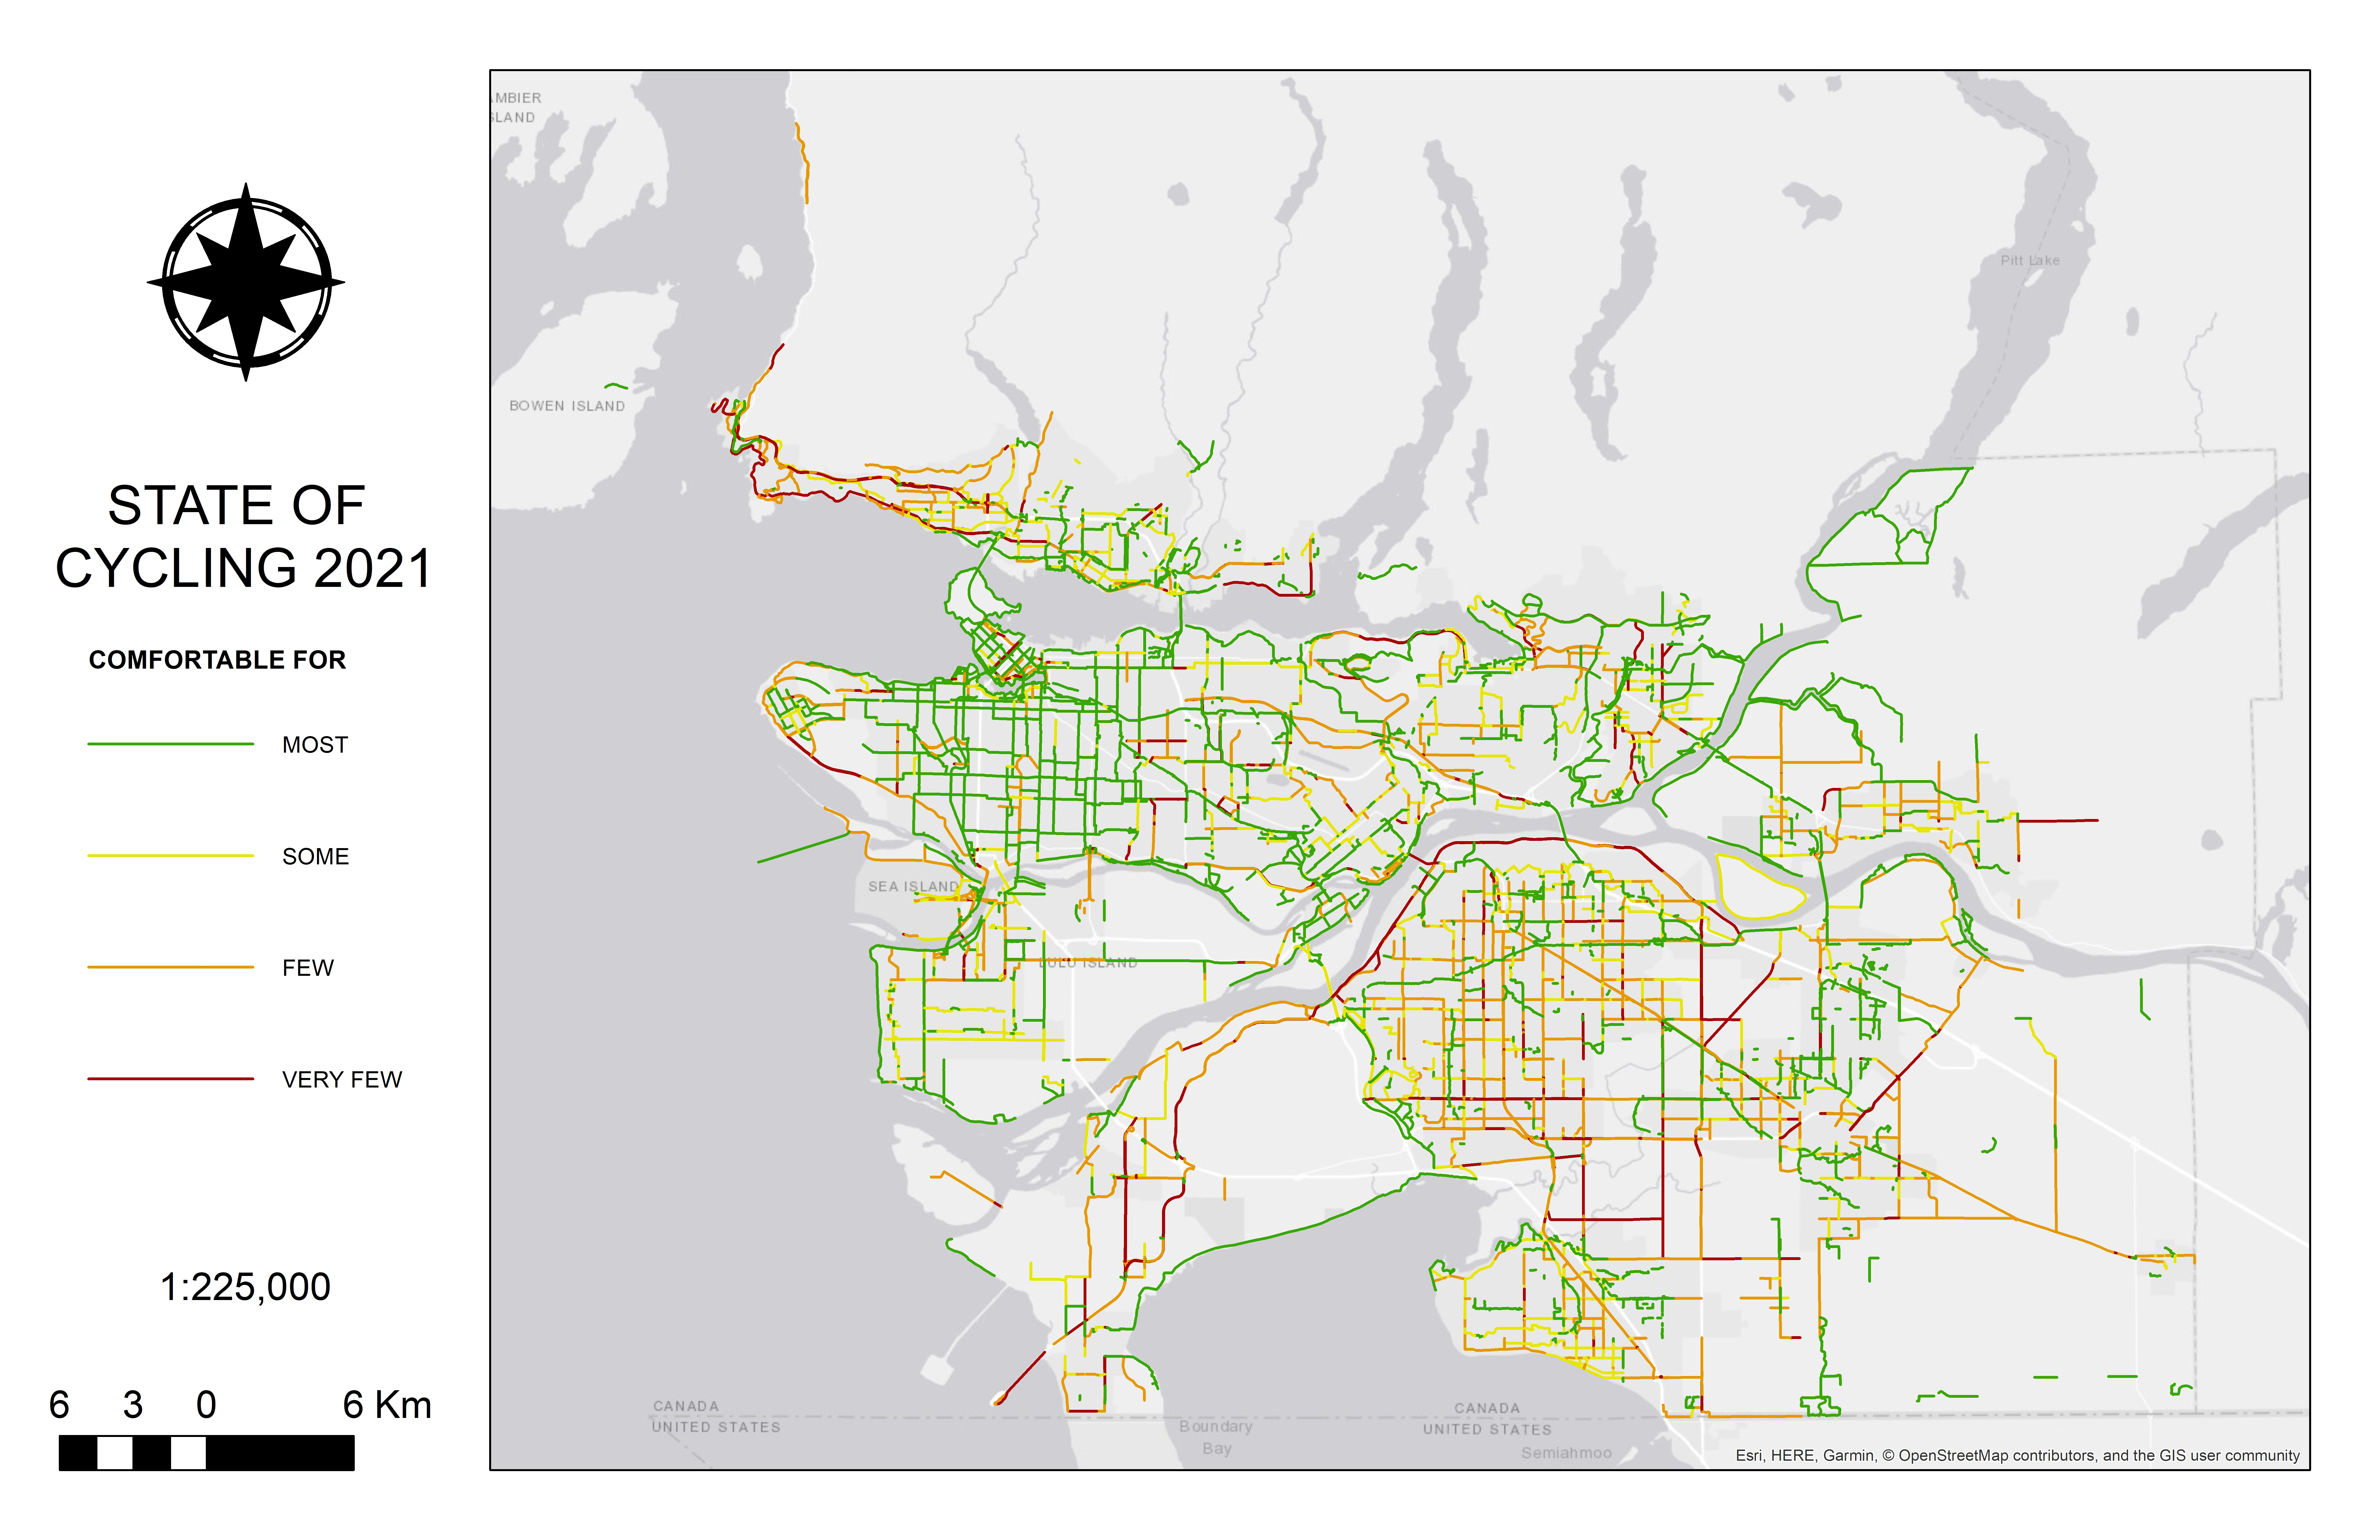 State of Cycling 2021 GIS Map